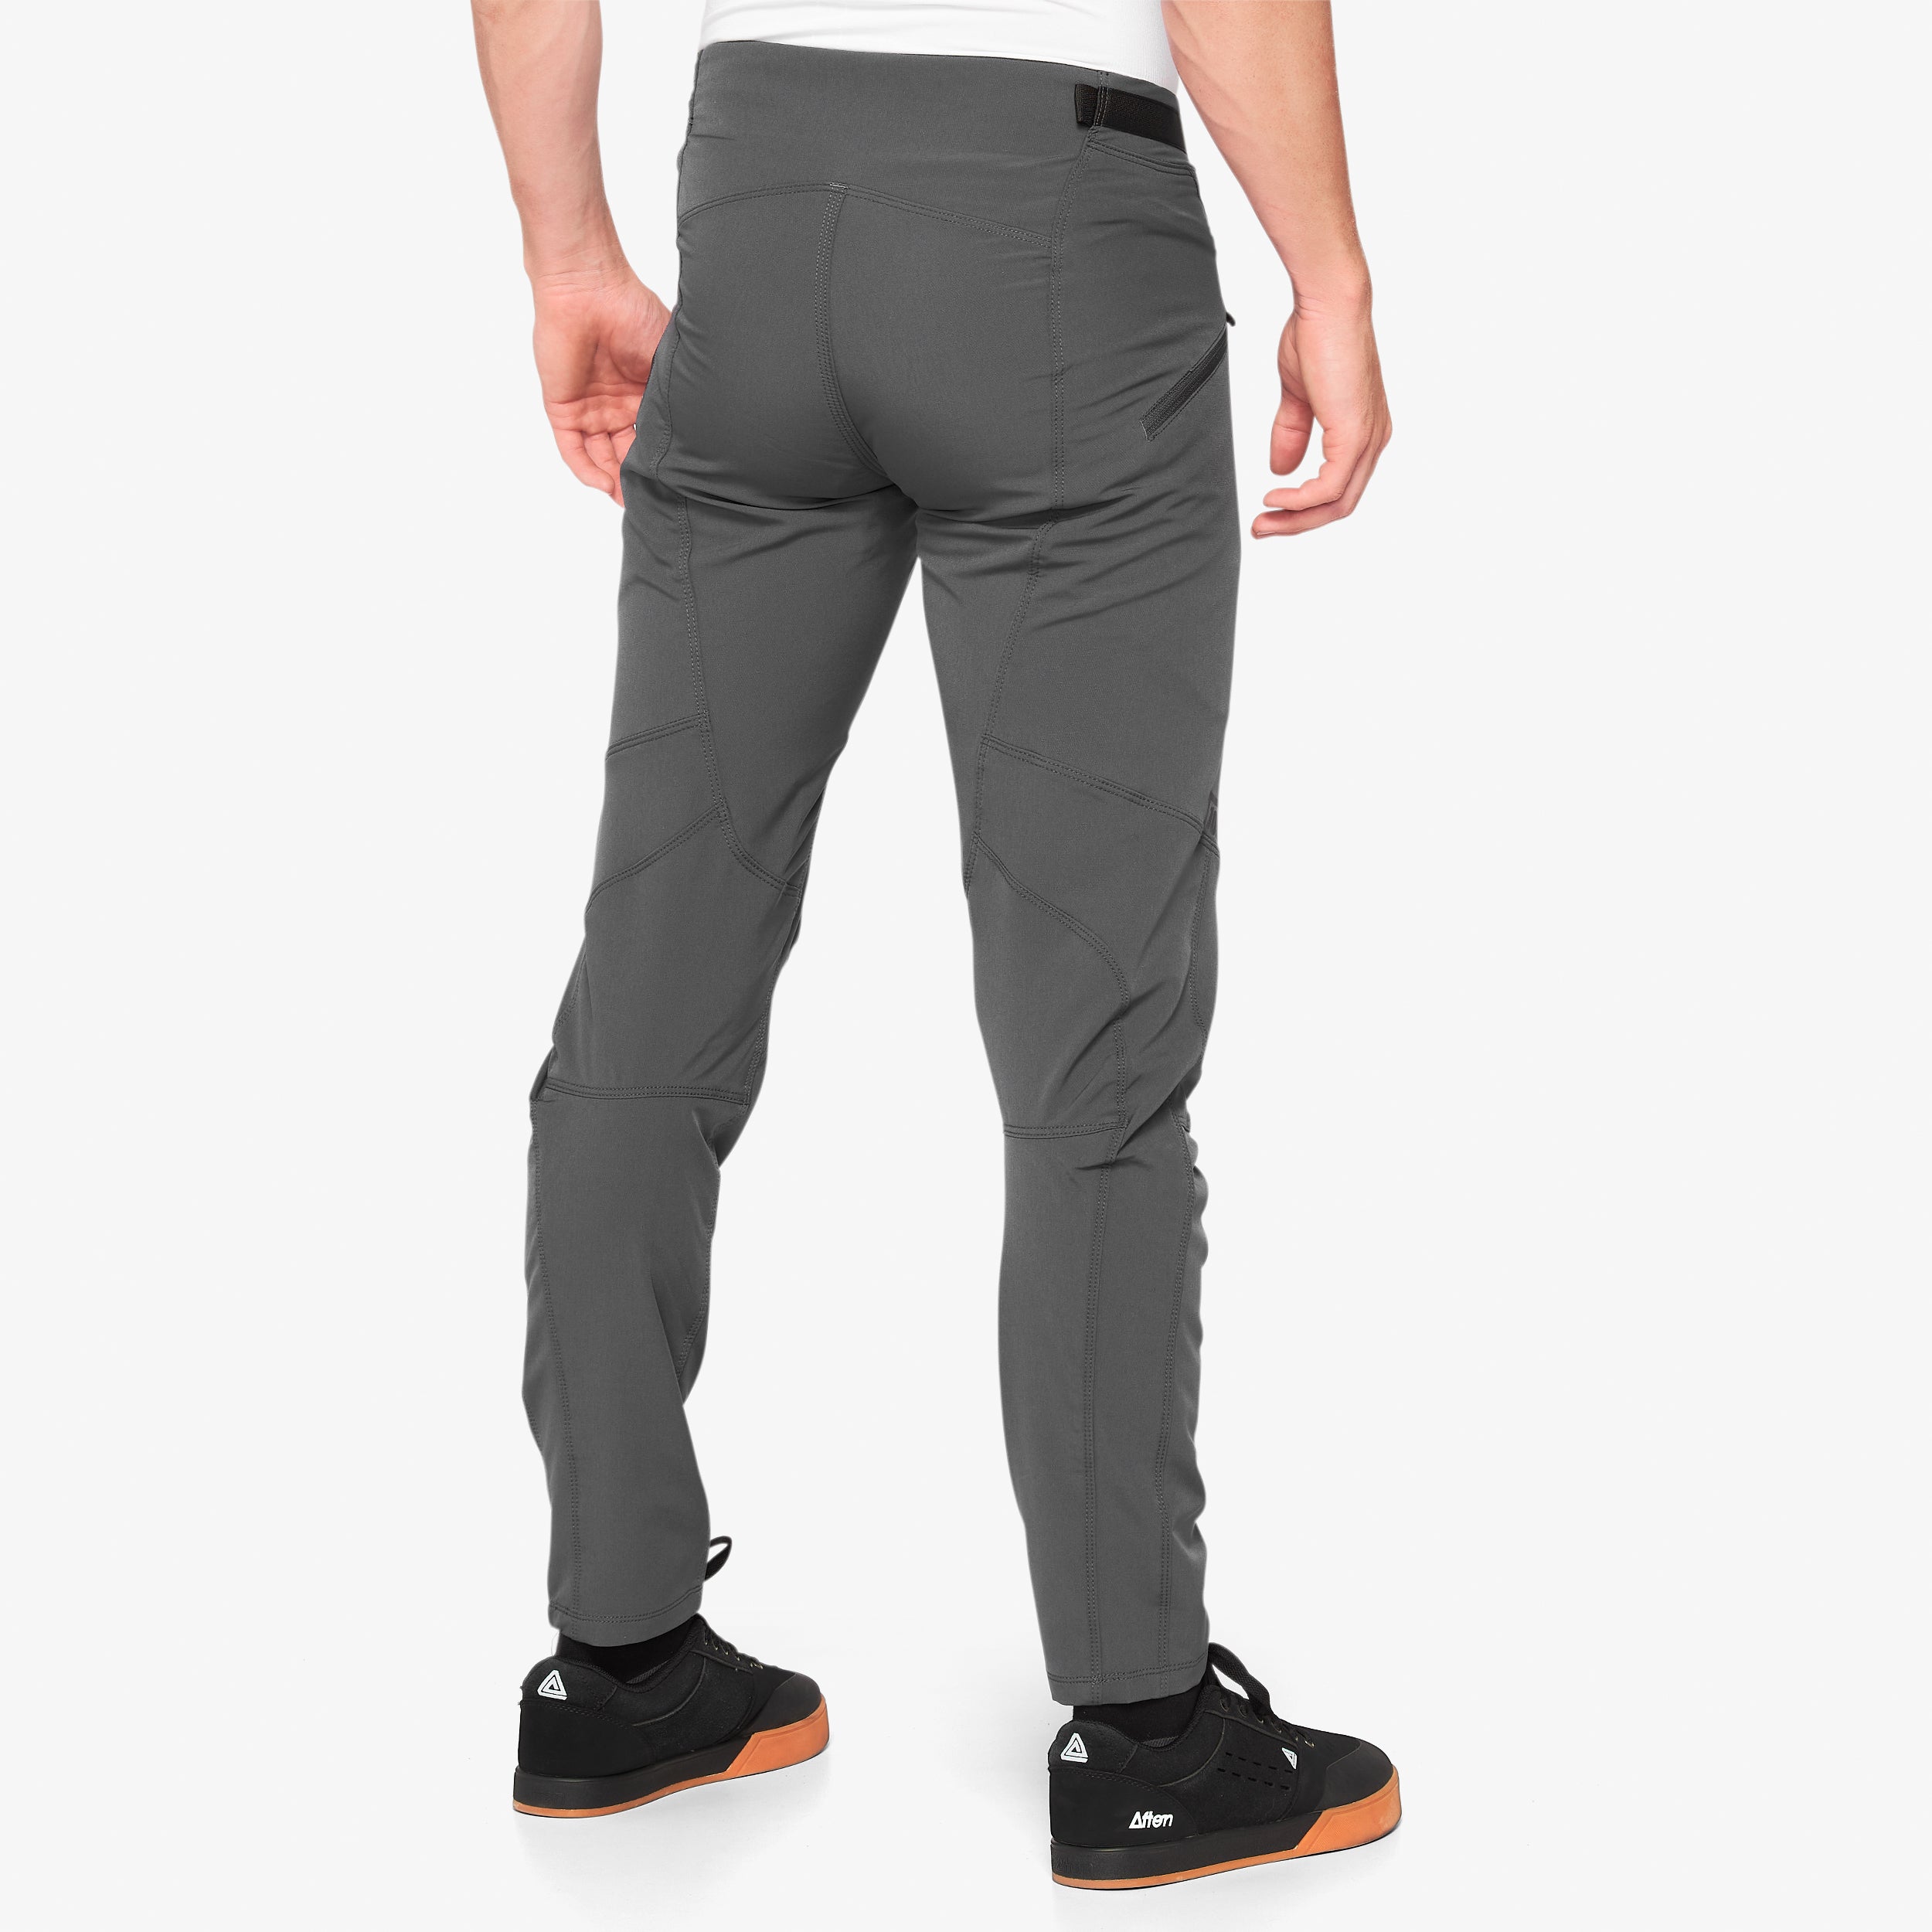 AIRMATIC Pants Charcoal - Secondary